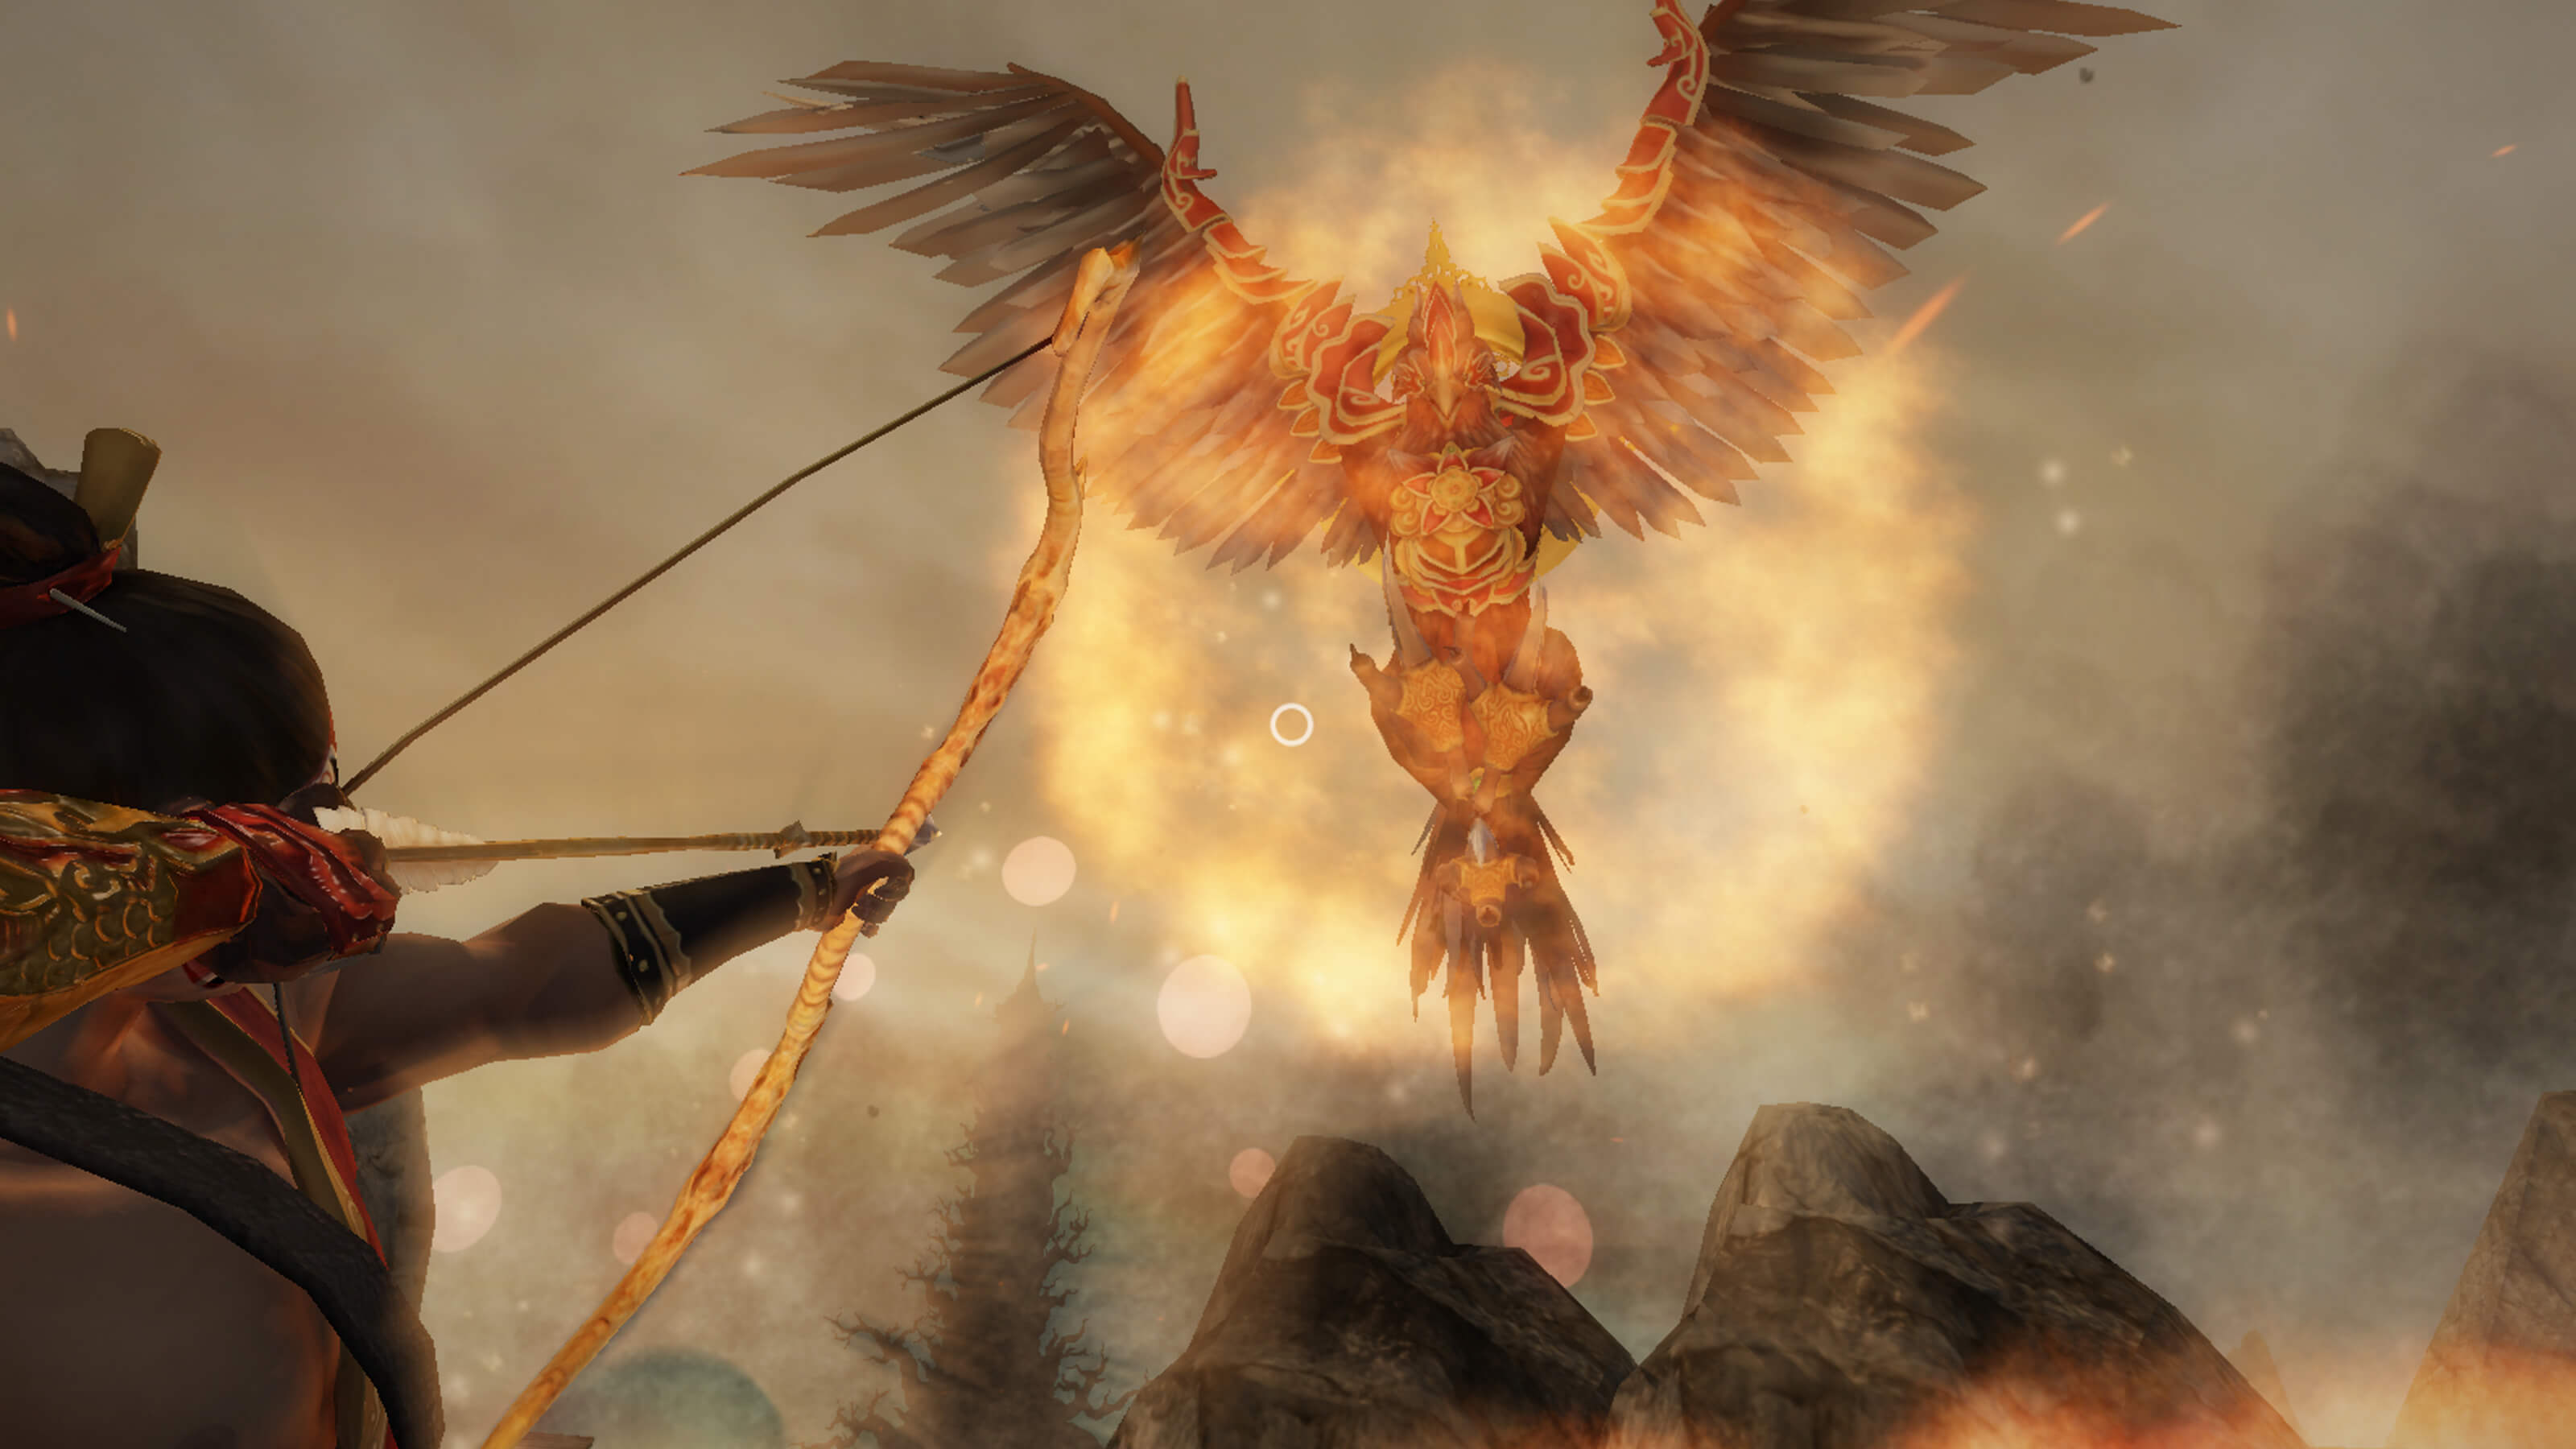 The player taking aim at a glowing, fiery bird in the air with a bow and arrow